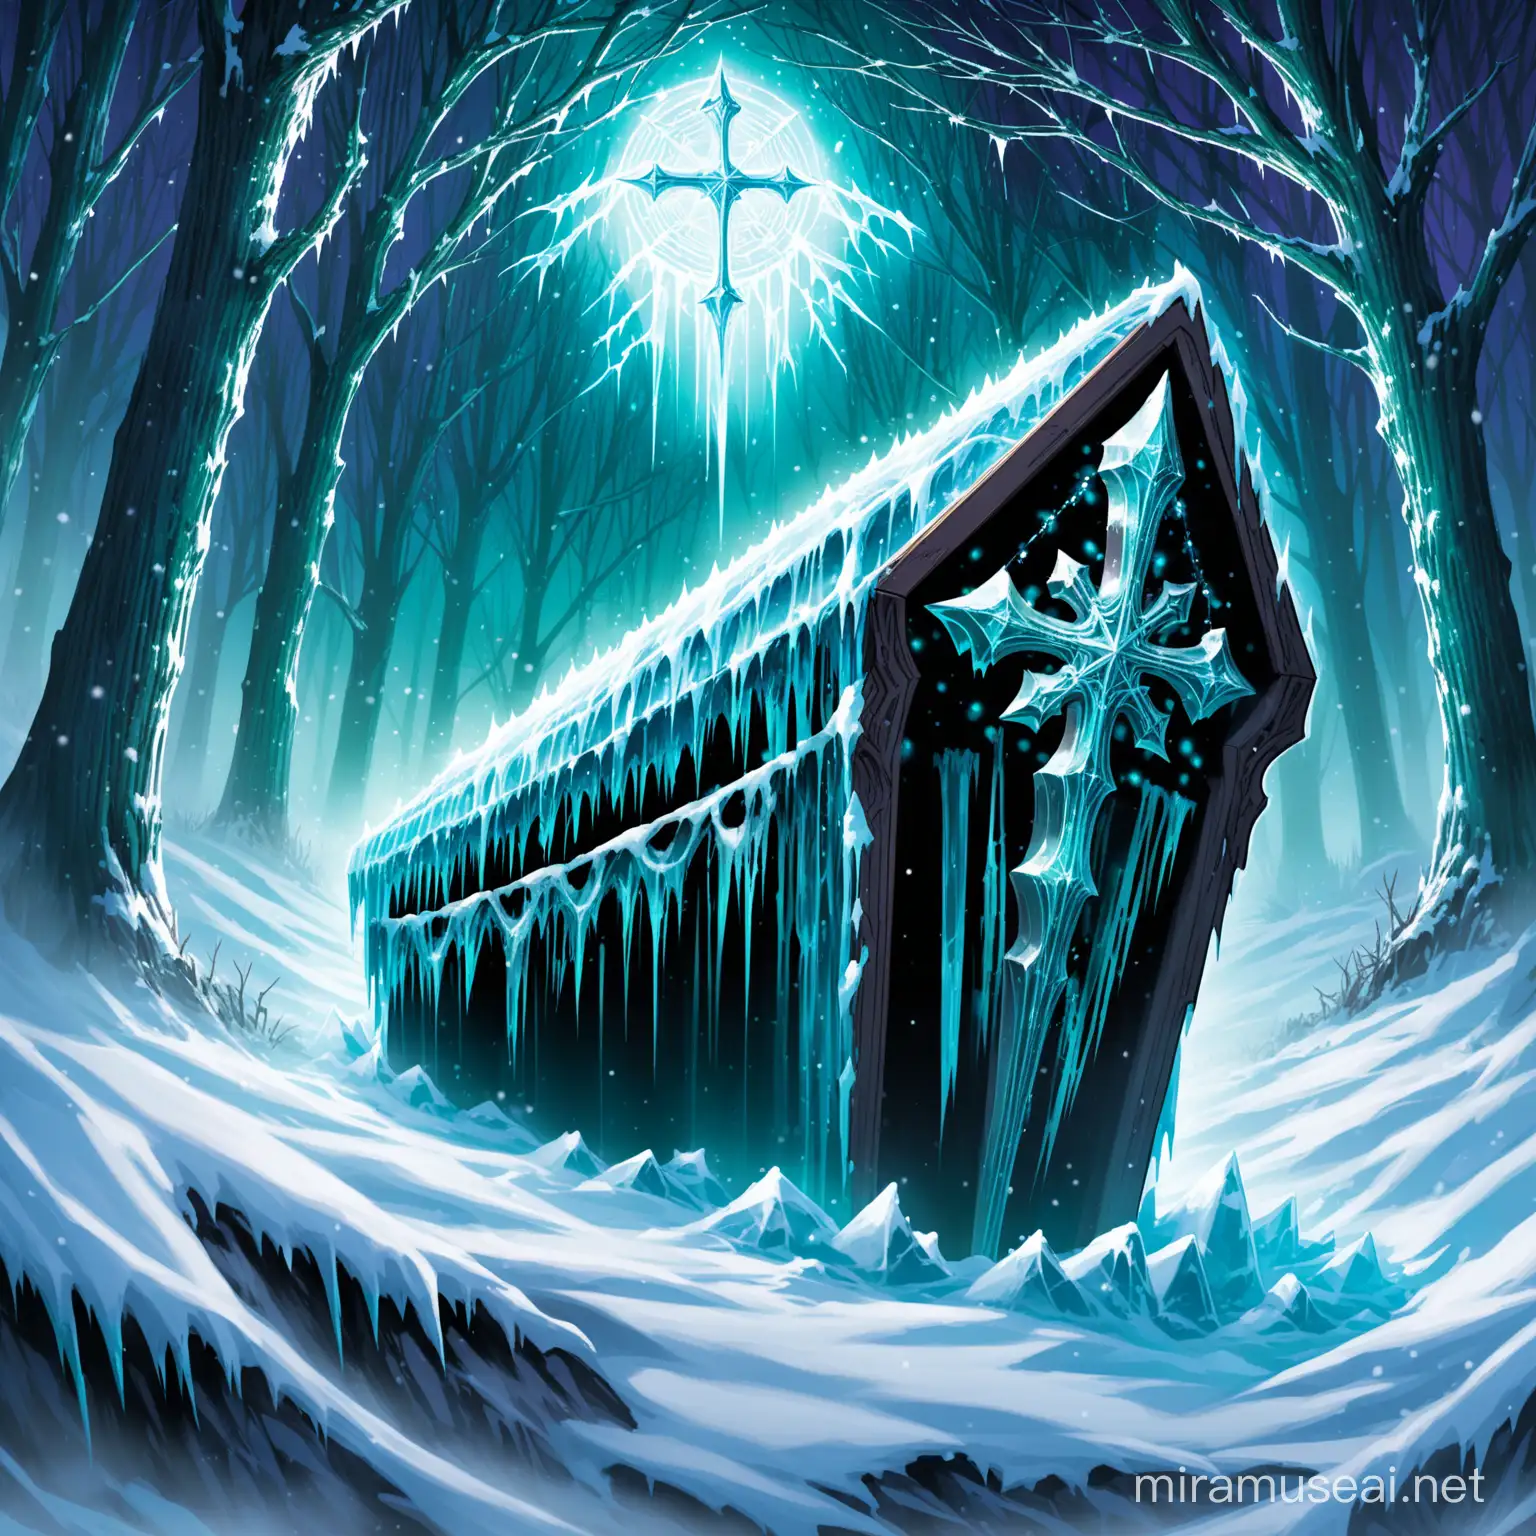 domain expansion frozen coffin of dreaded night
